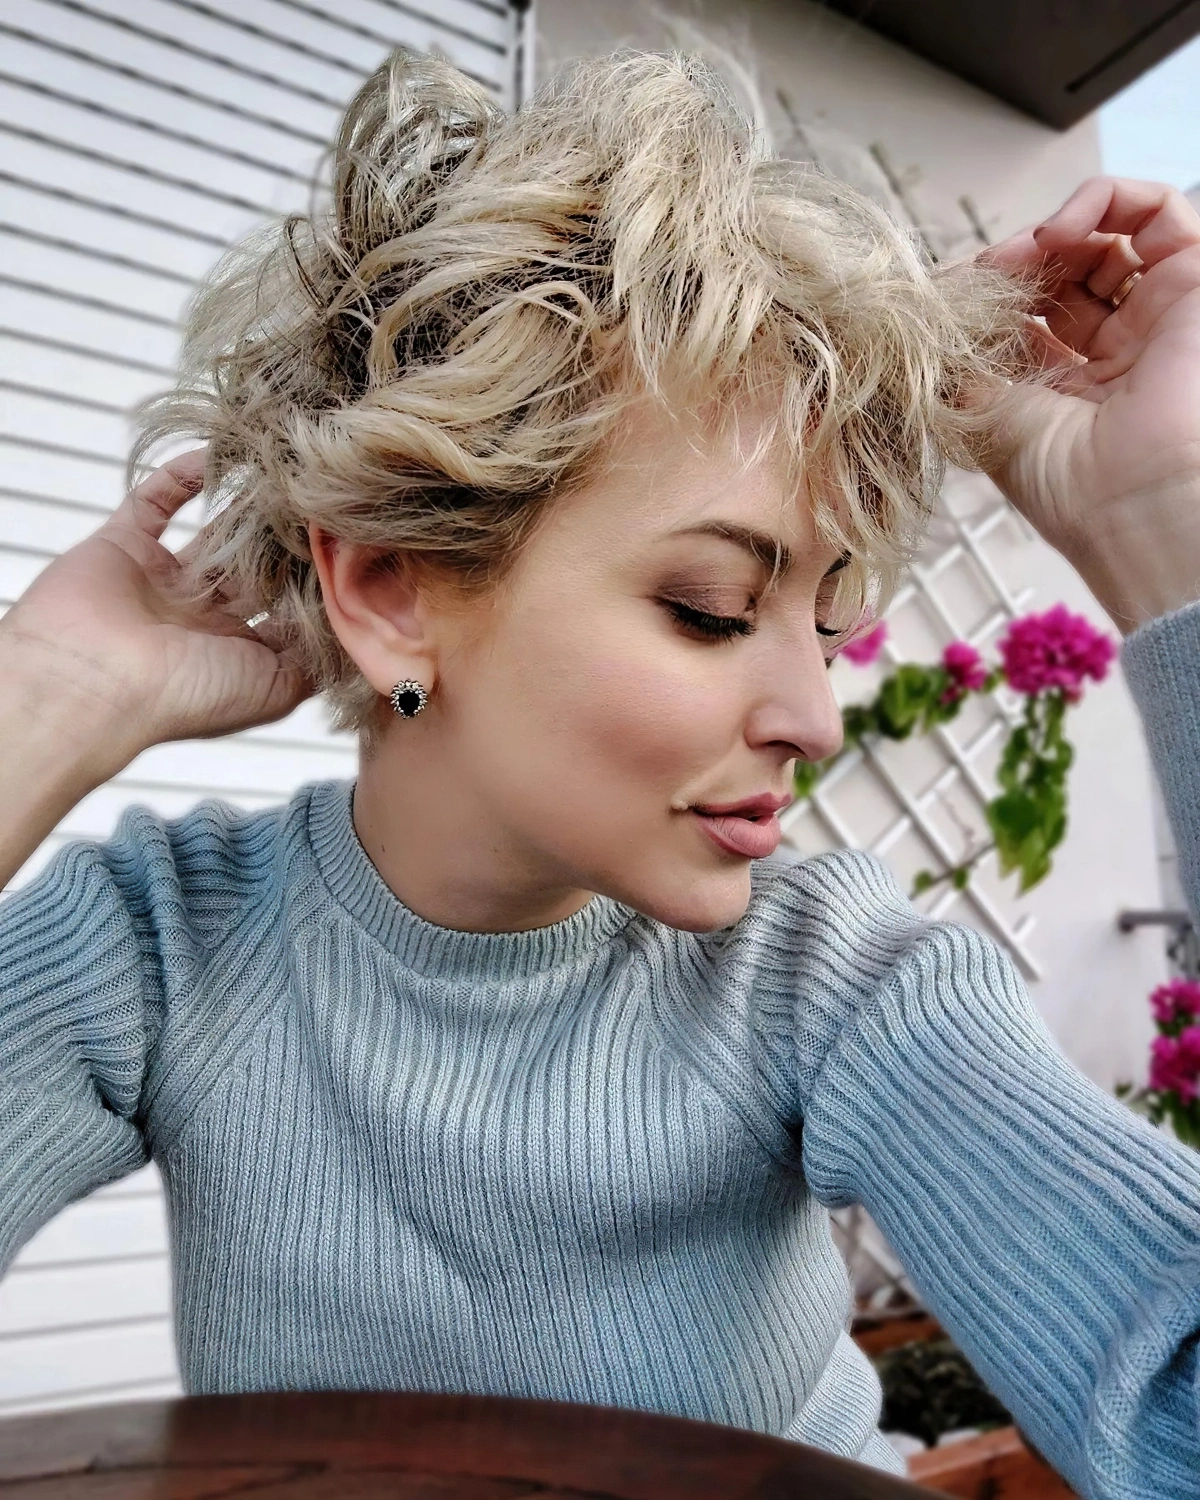 coiffure cheveux messy boucles pixie long maquillage nude pull bleu gris